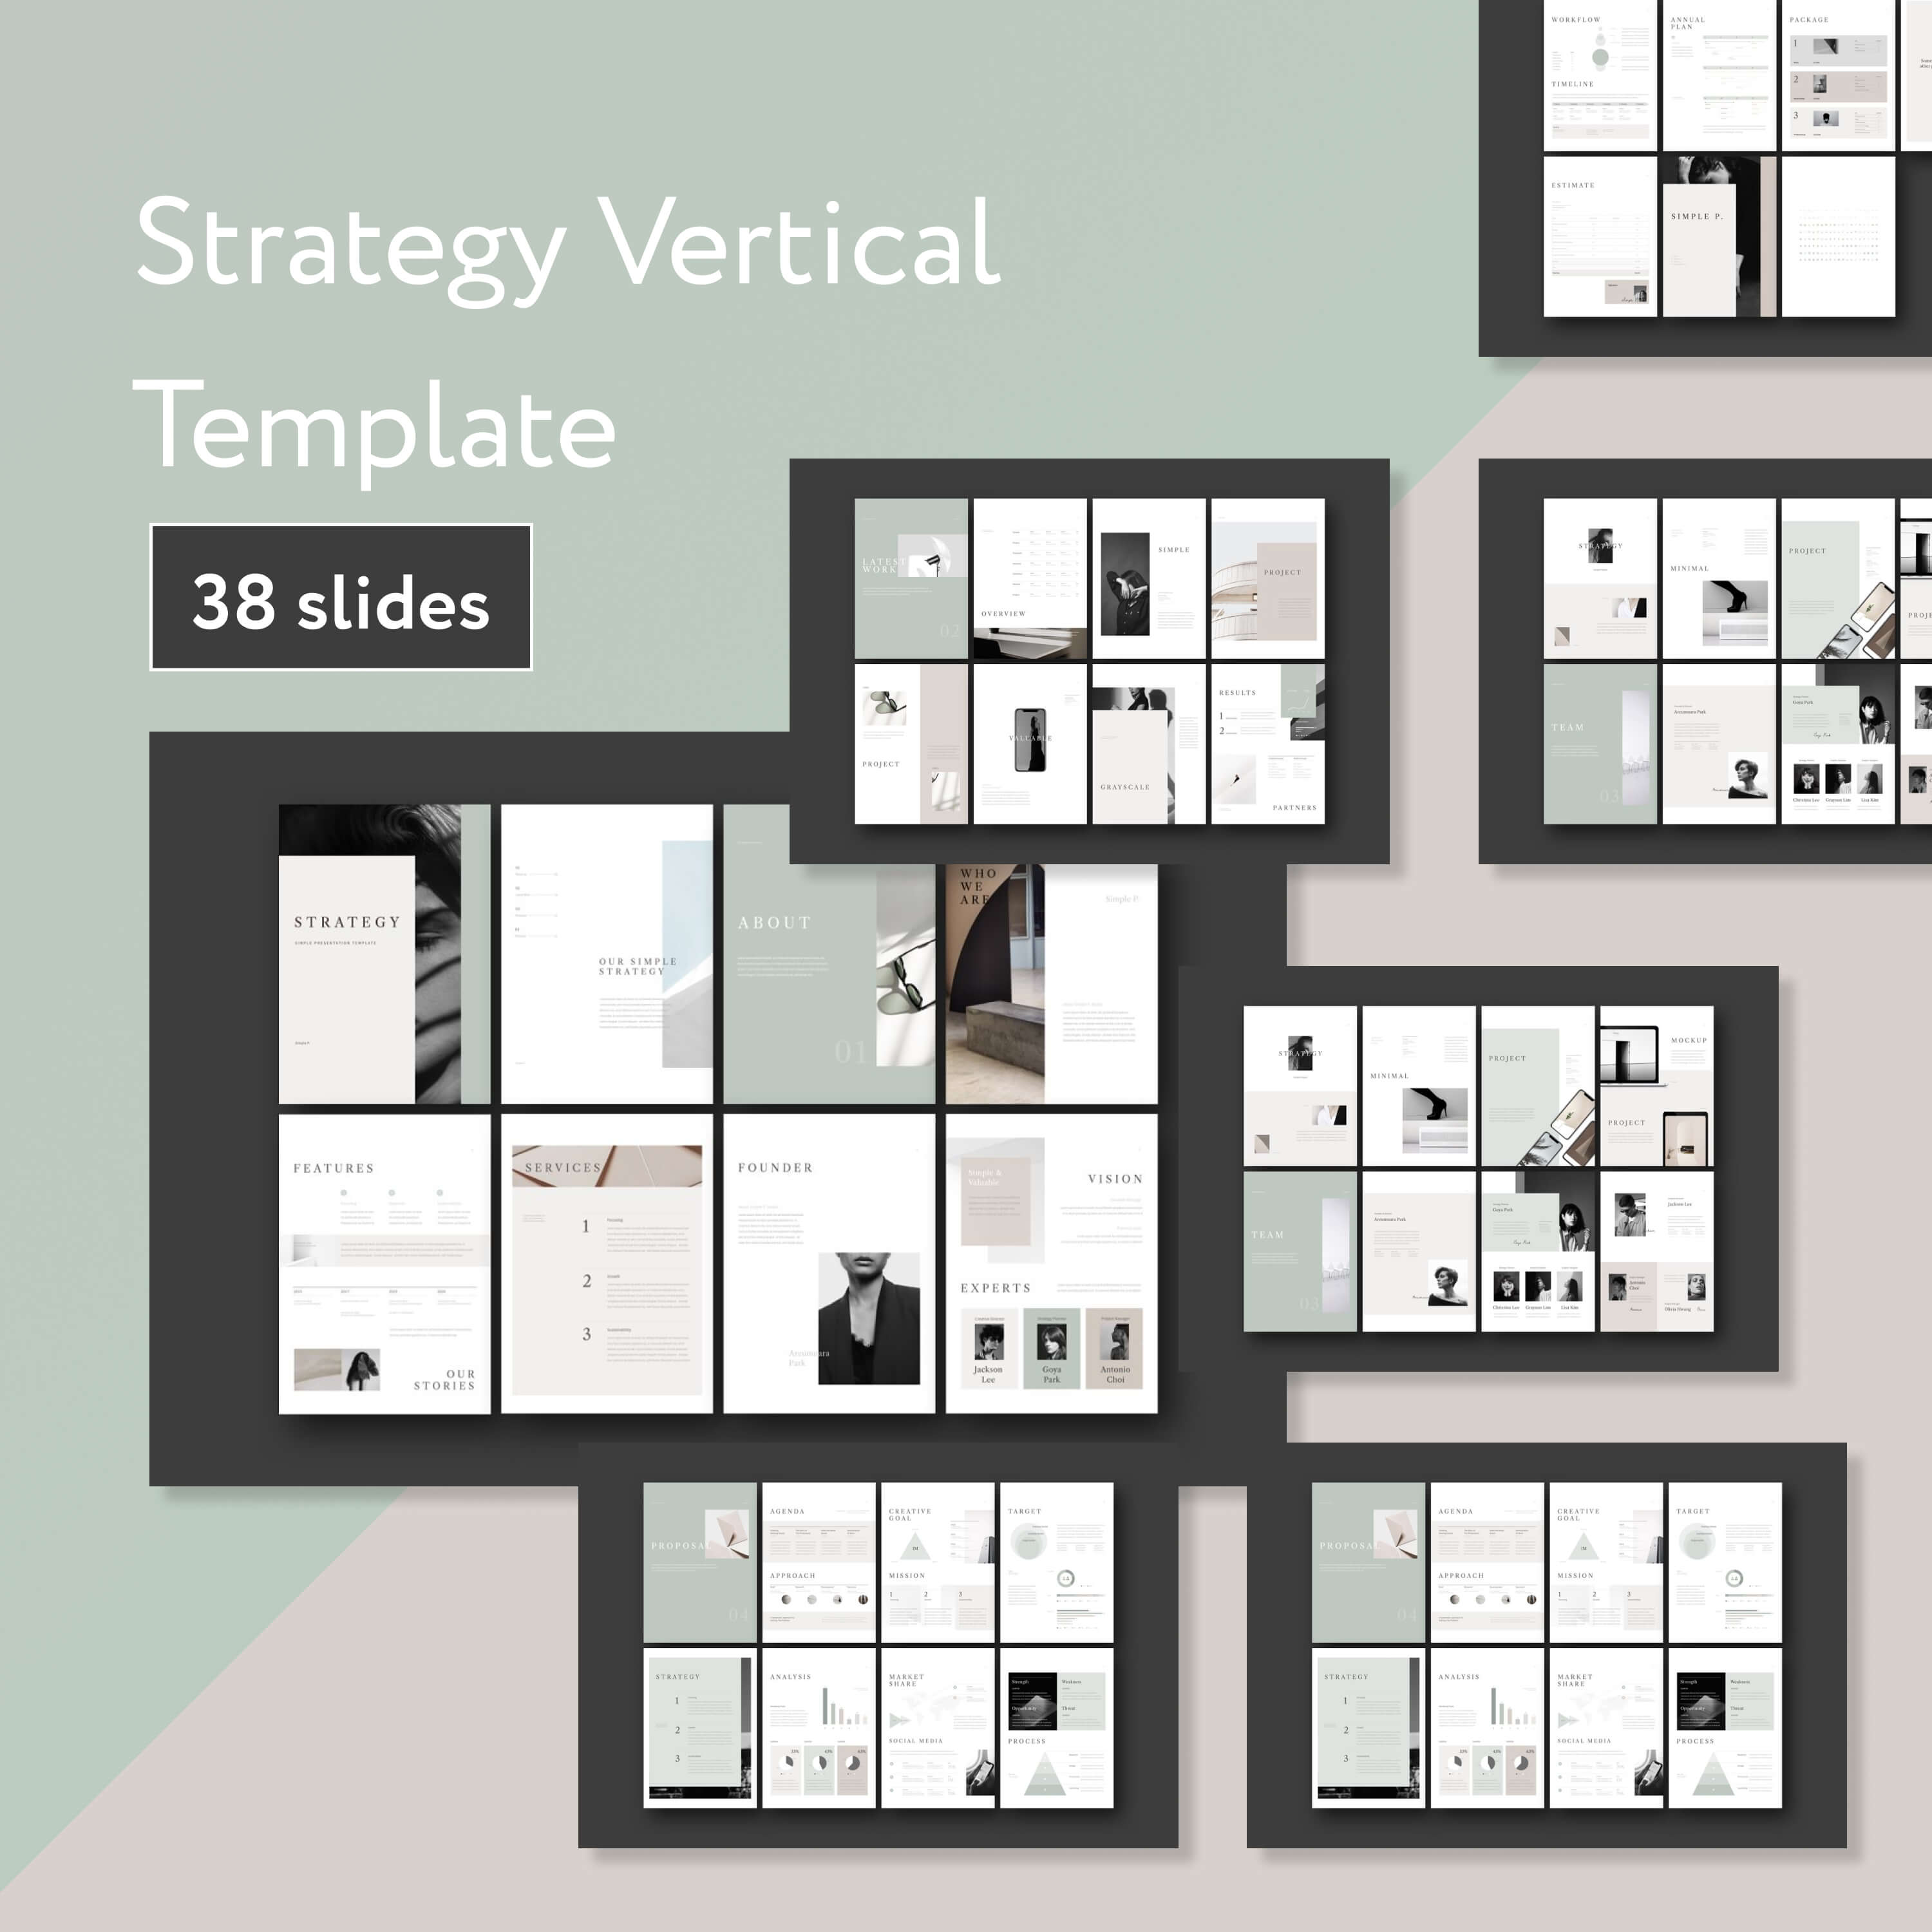 Strategy Vertical Template.